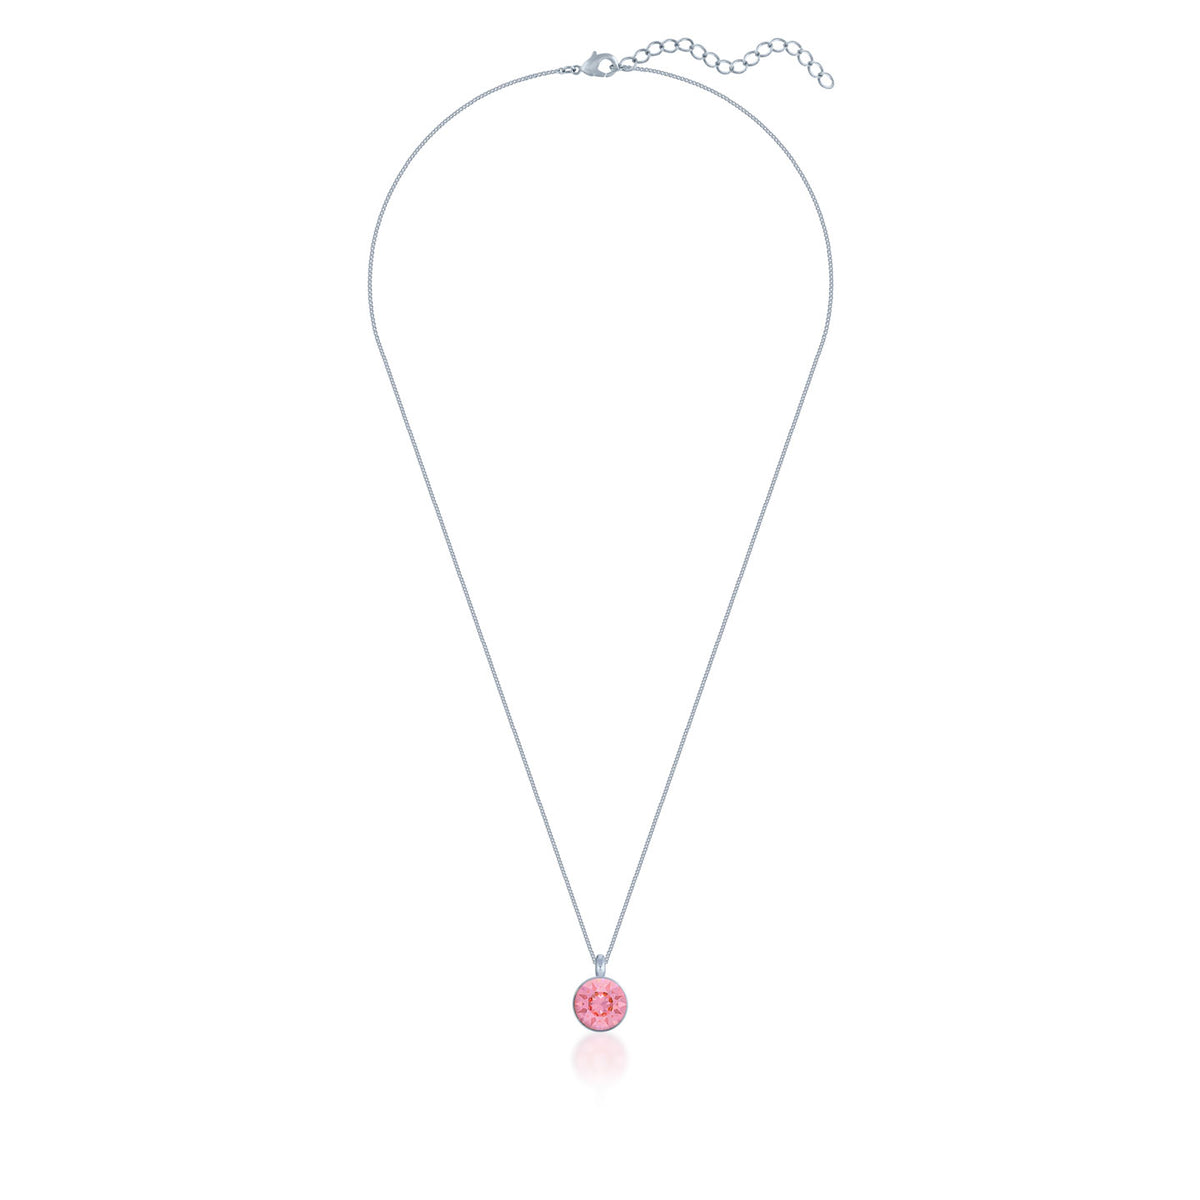 Bella Pendant Necklace with Pink Light Rose Round Crystals from Swarovski Silver Toned Rhodium Plated - Ed Heart